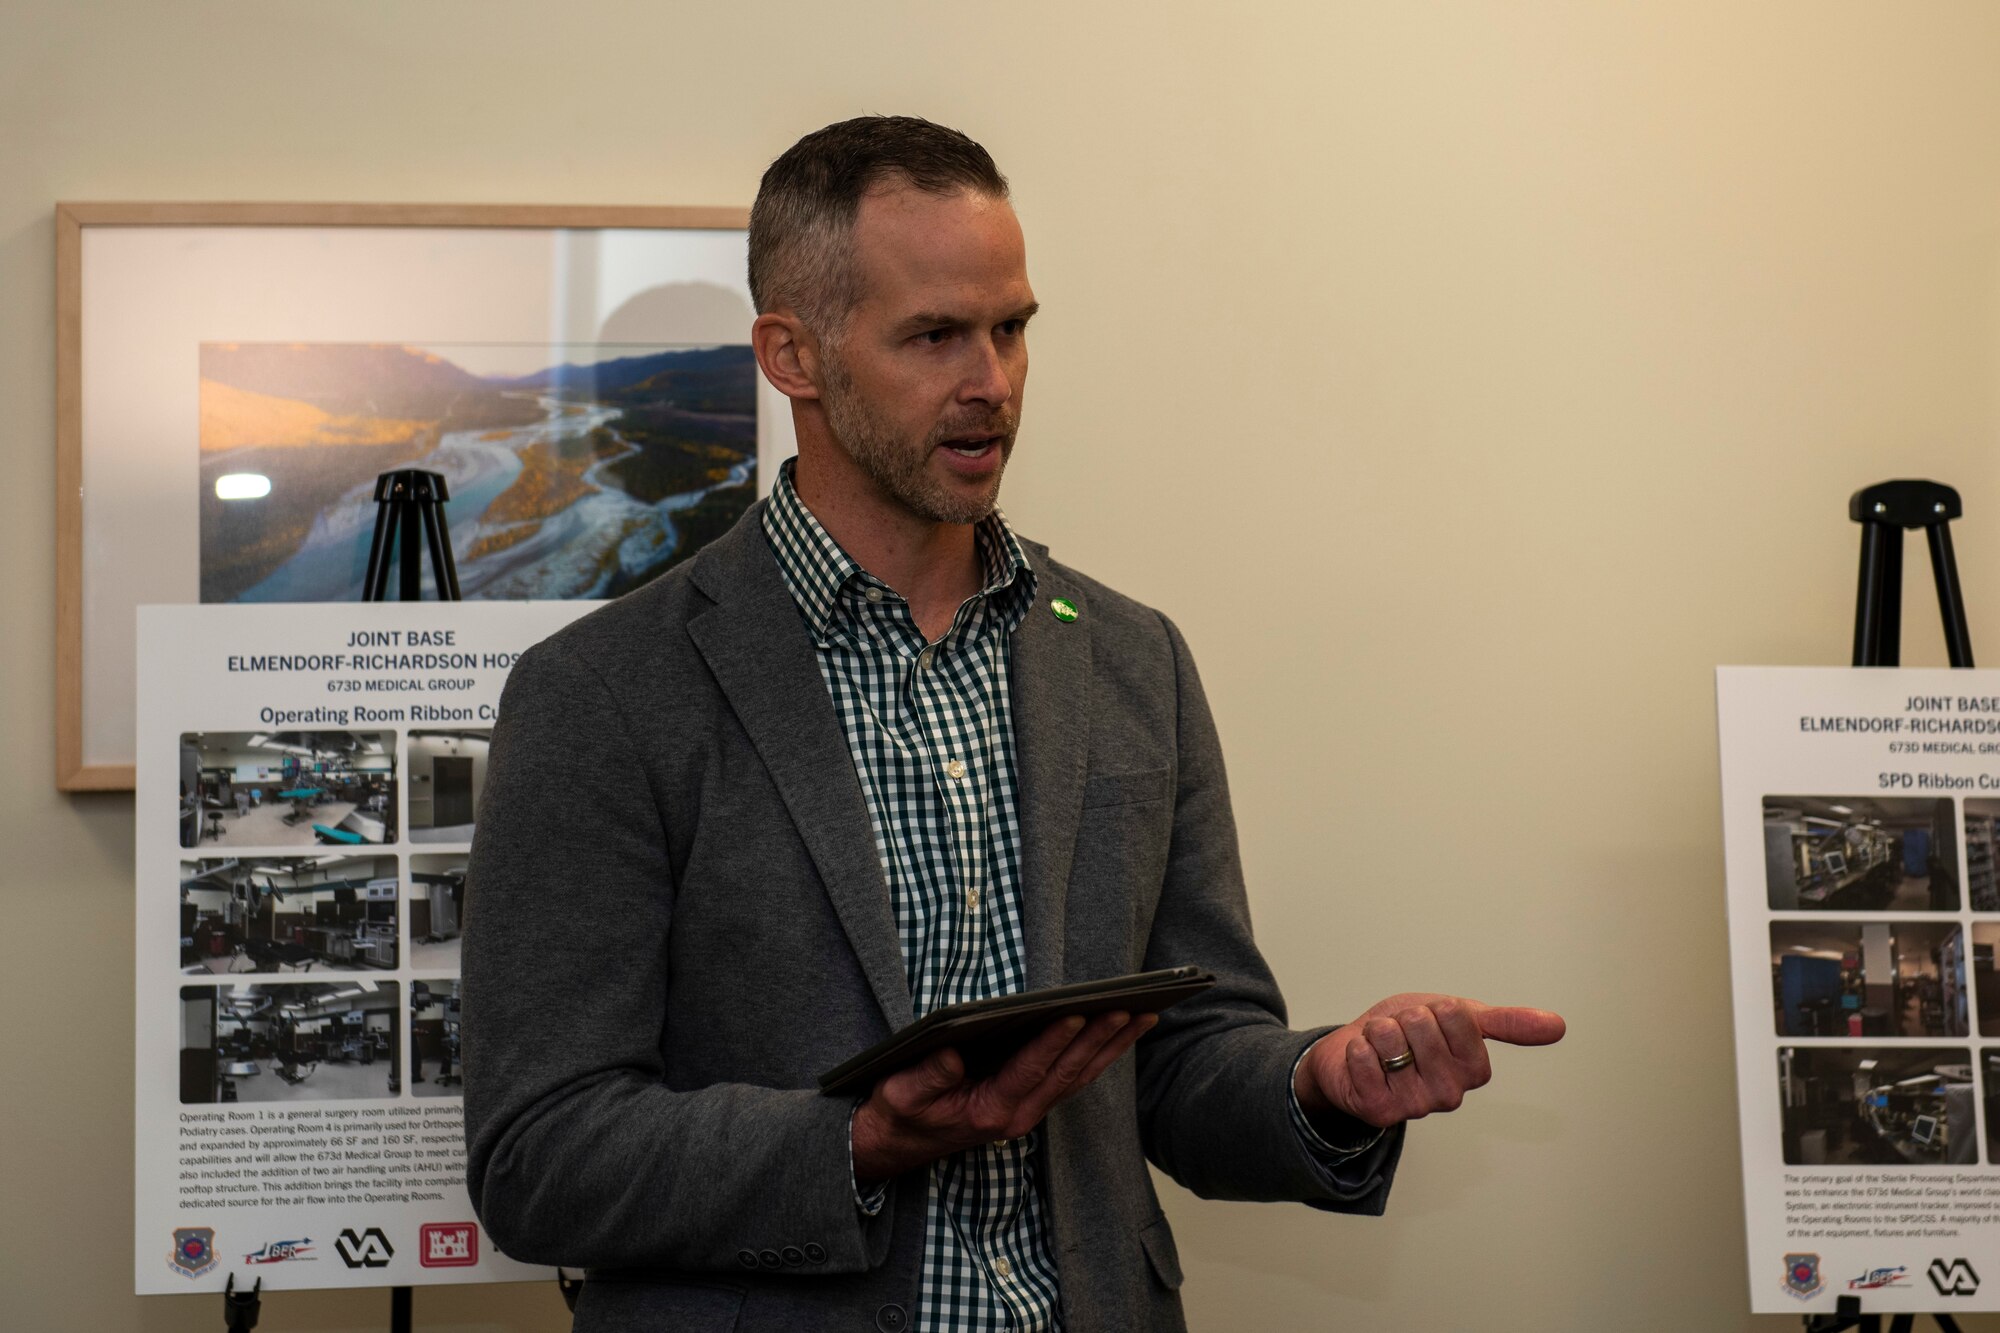 Matt Clugston, federal healthcare program manager with Walsh Construction, speaks at a ribbon-cutting ceremony for the new MRI suite in the Joint Base Elmendorf-Richardson hospital on JBER, Alaska, Oct. 28, 2019. The MRI area remodel included the creation of one joint control room, rather than the former two control rooms in separate areas; an upgraded 1.5 Tesla GE scanner; and newer patient amenities such as dressing rooms, a reception desk, a waiting area, and murals and lighting in the scanner rooms for patient comfort.